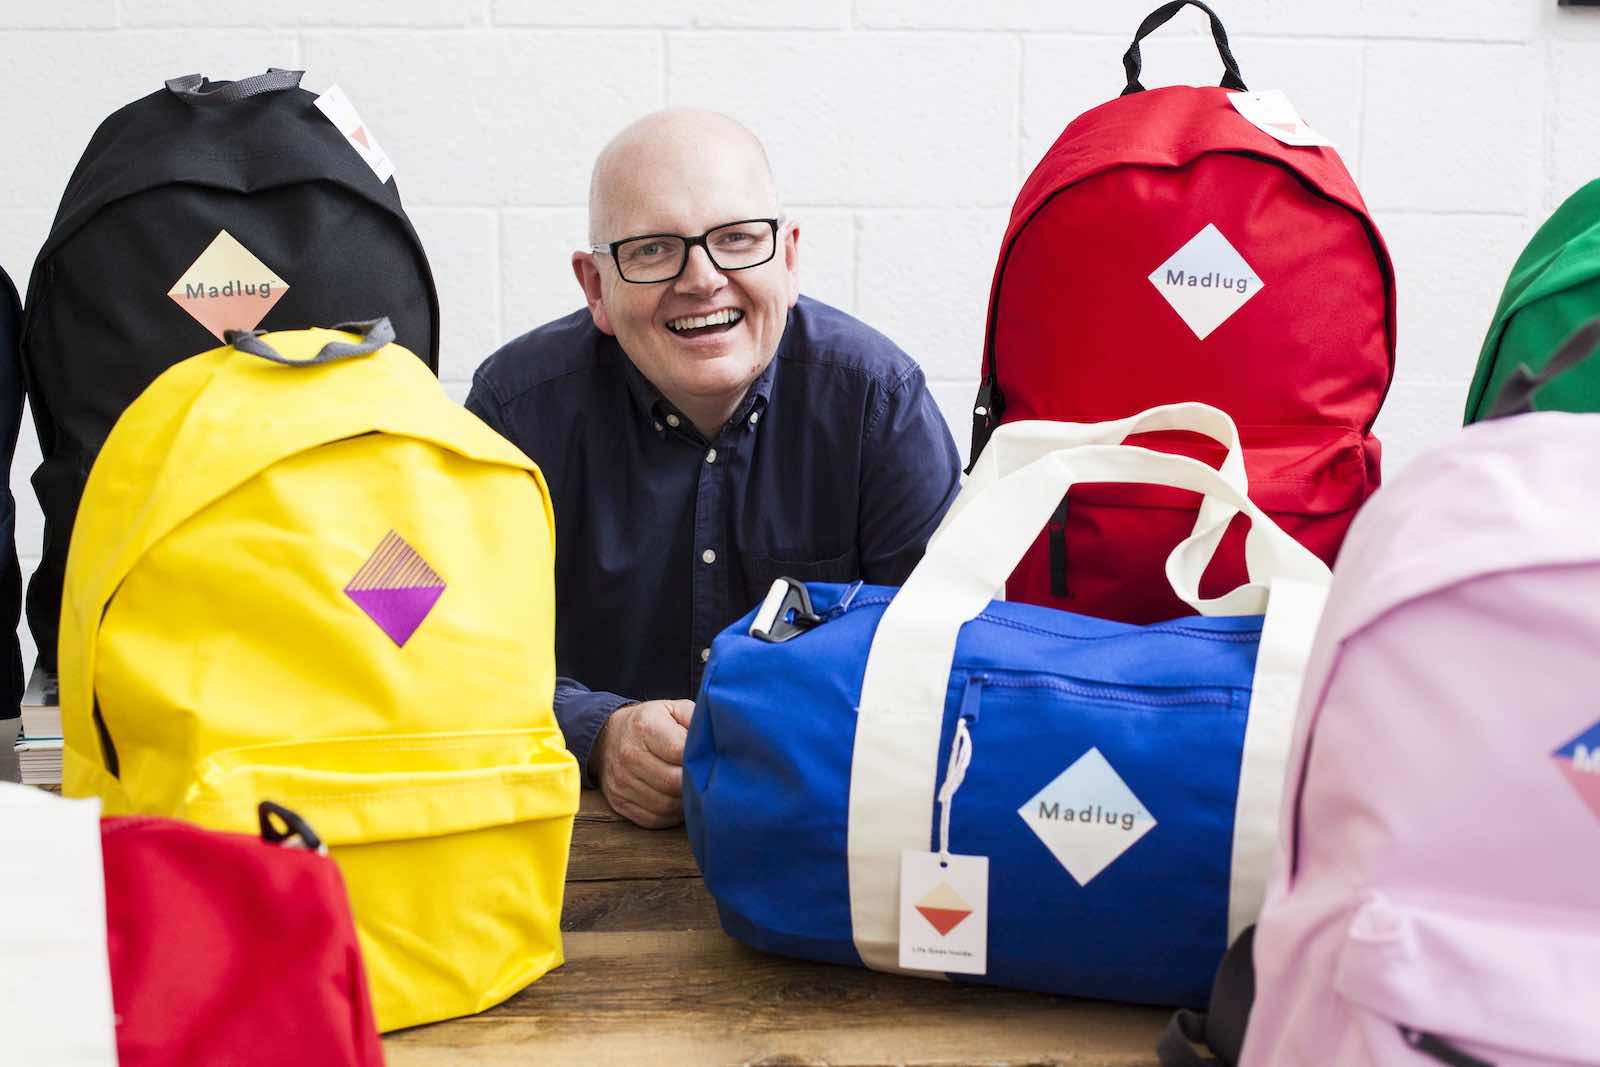 Madlug founder Dave shows off his bags. He donates one to a child in foster care for every one he sells.